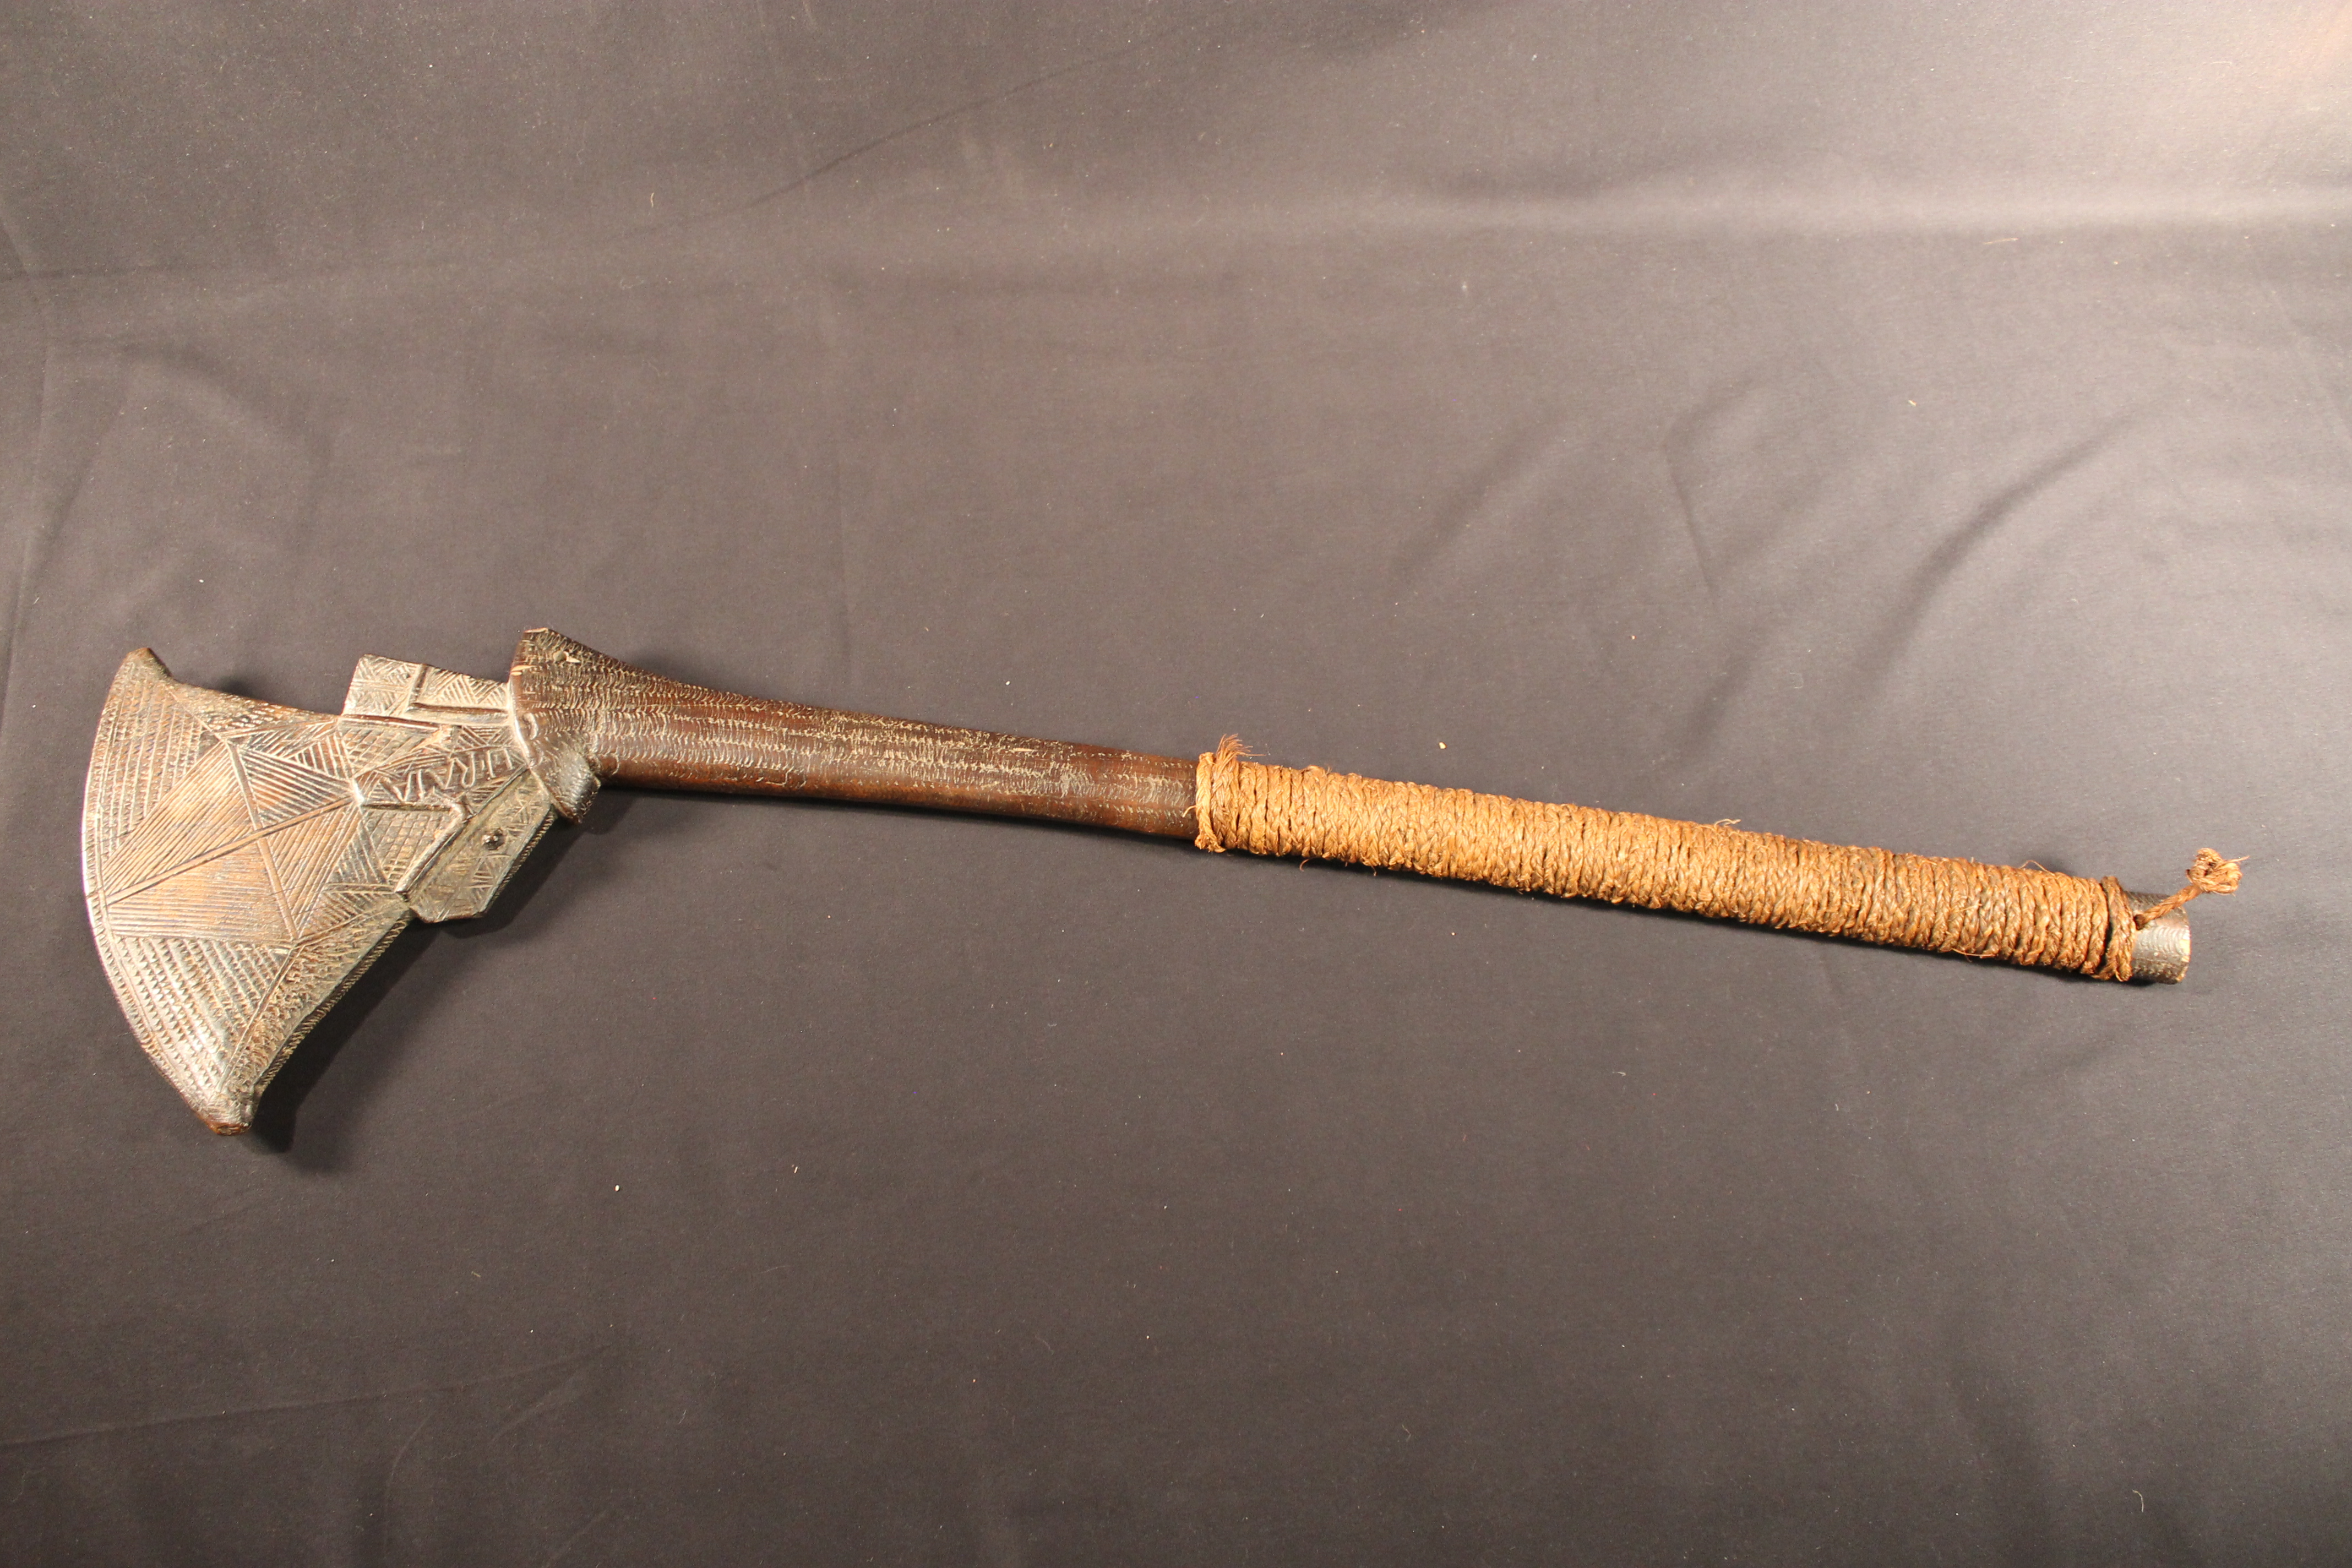 Wooden carved club decorated with diamond check pattern. The end of the club is wrapped in twisted fiber cord.